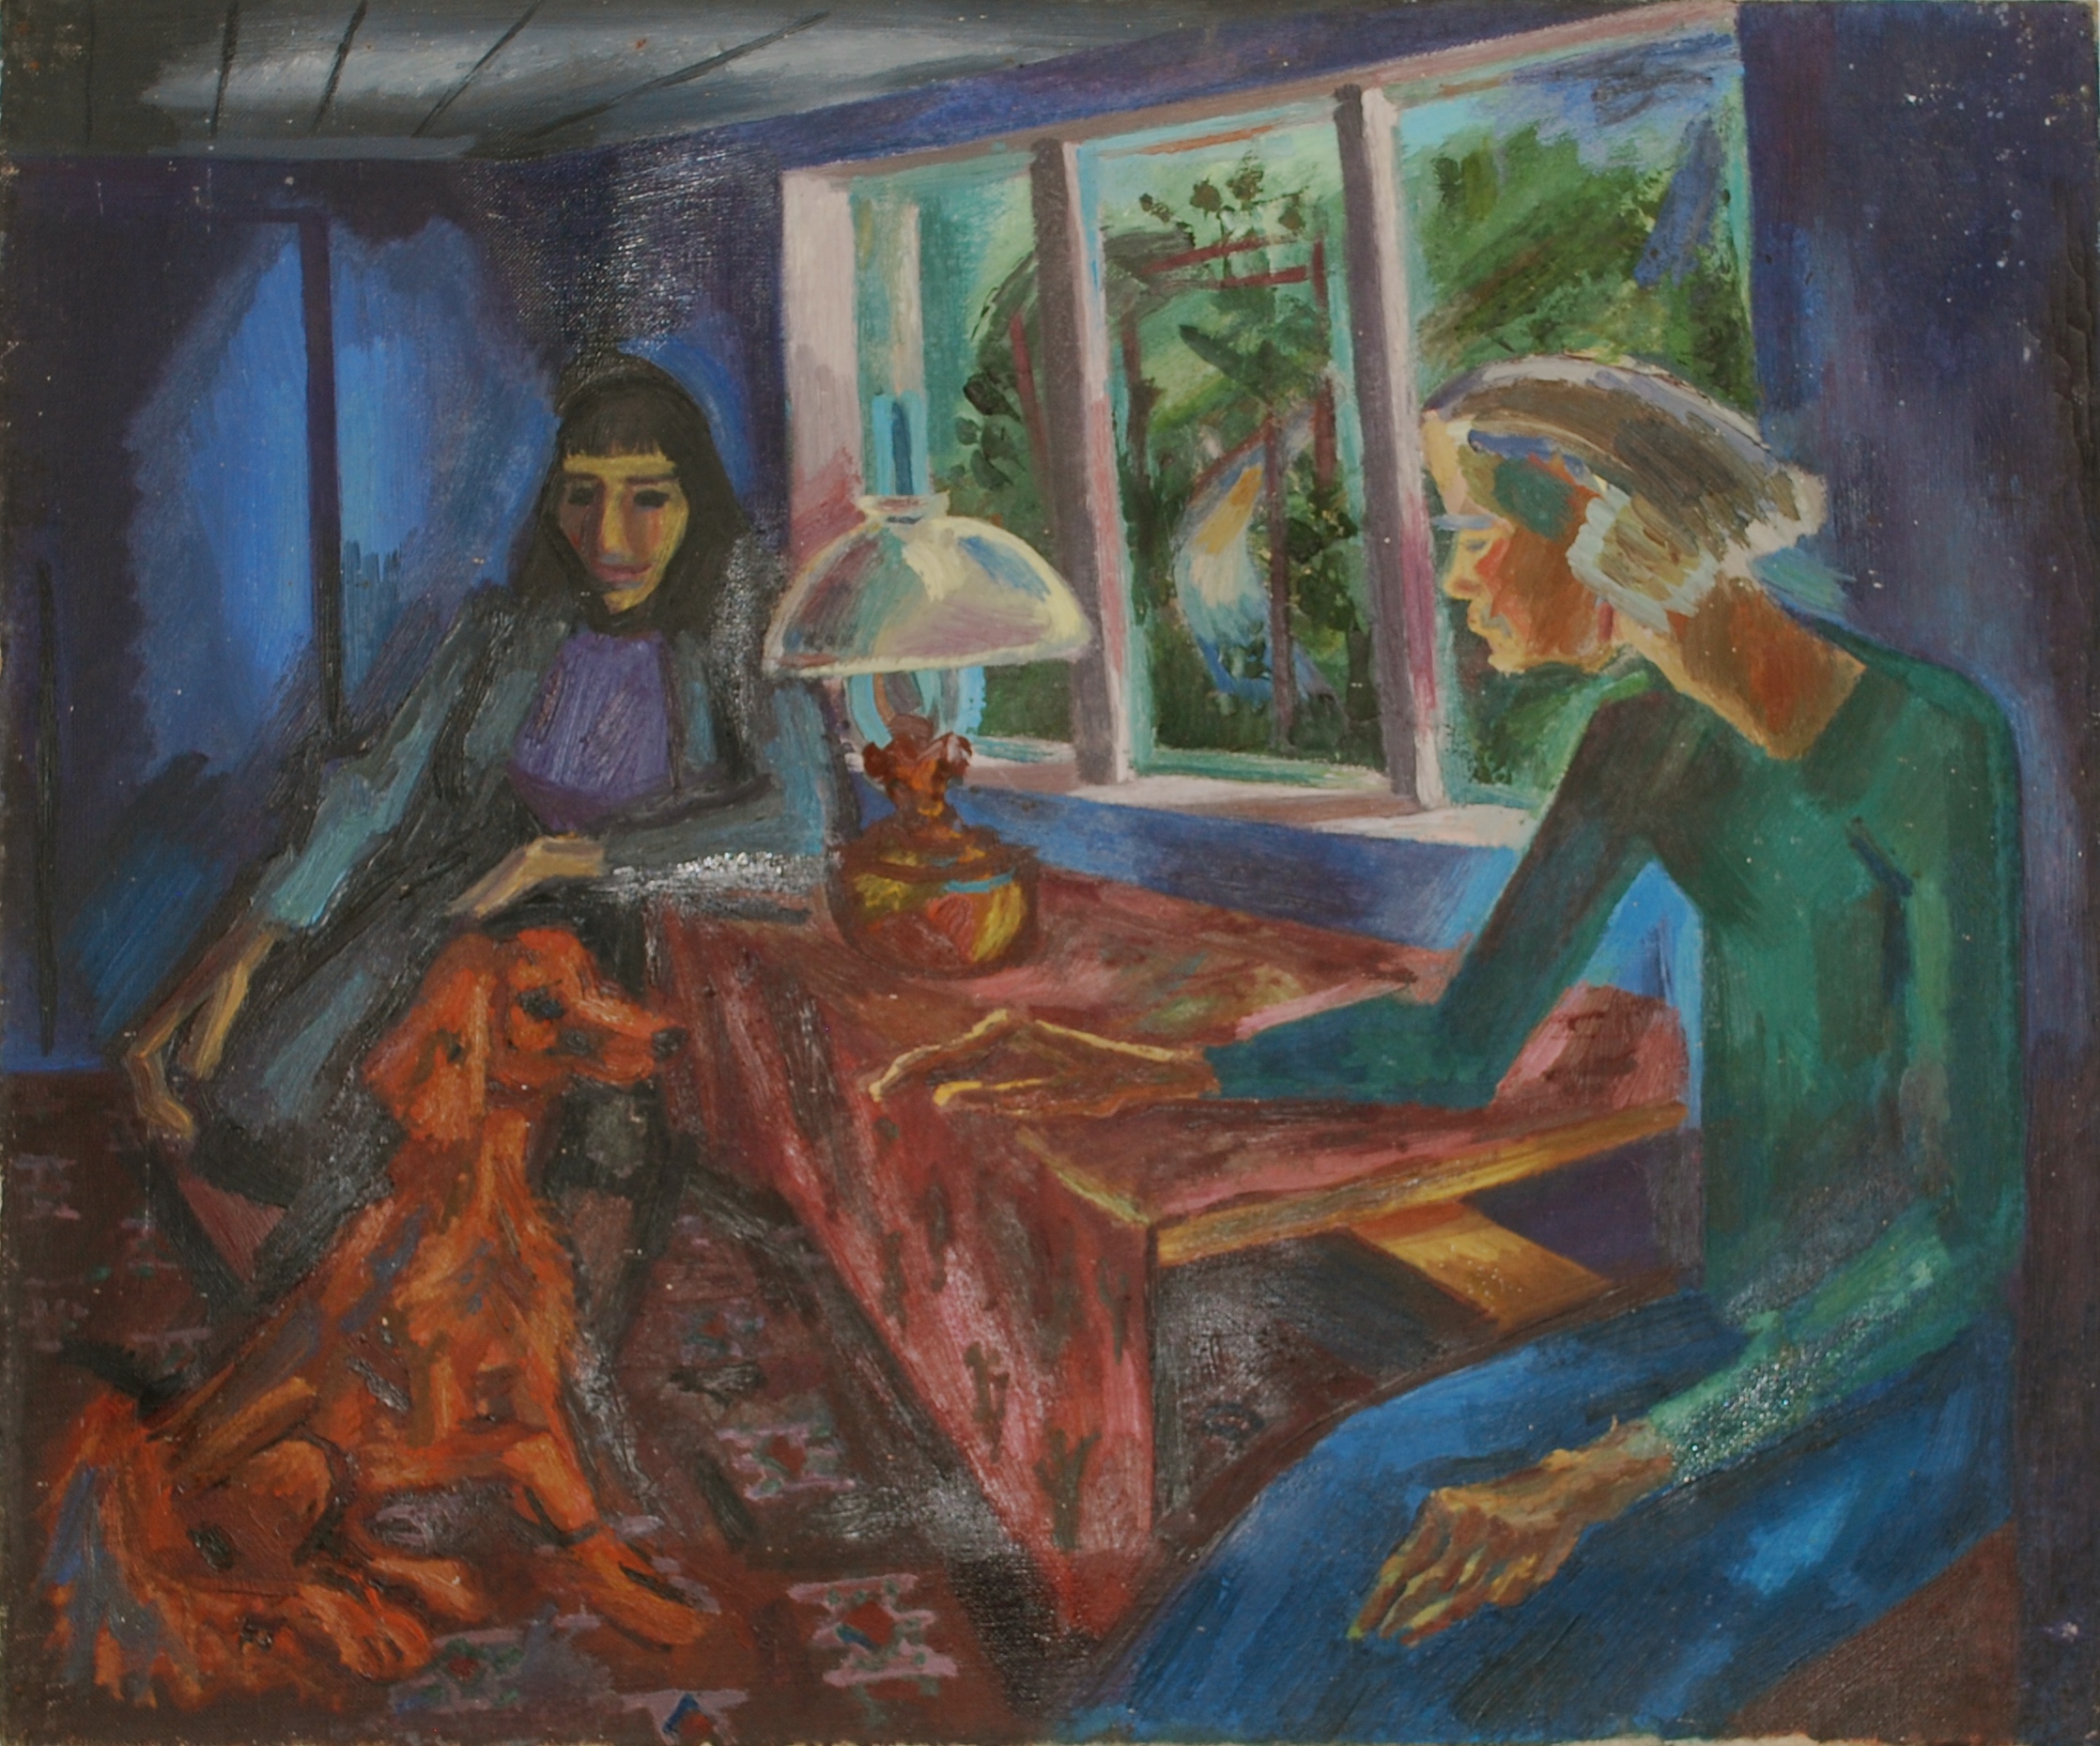  Two Figures with a Dog &nbsp;at a Window Oil on Canvas, c1940, &nbsp;76 x 64 cm 